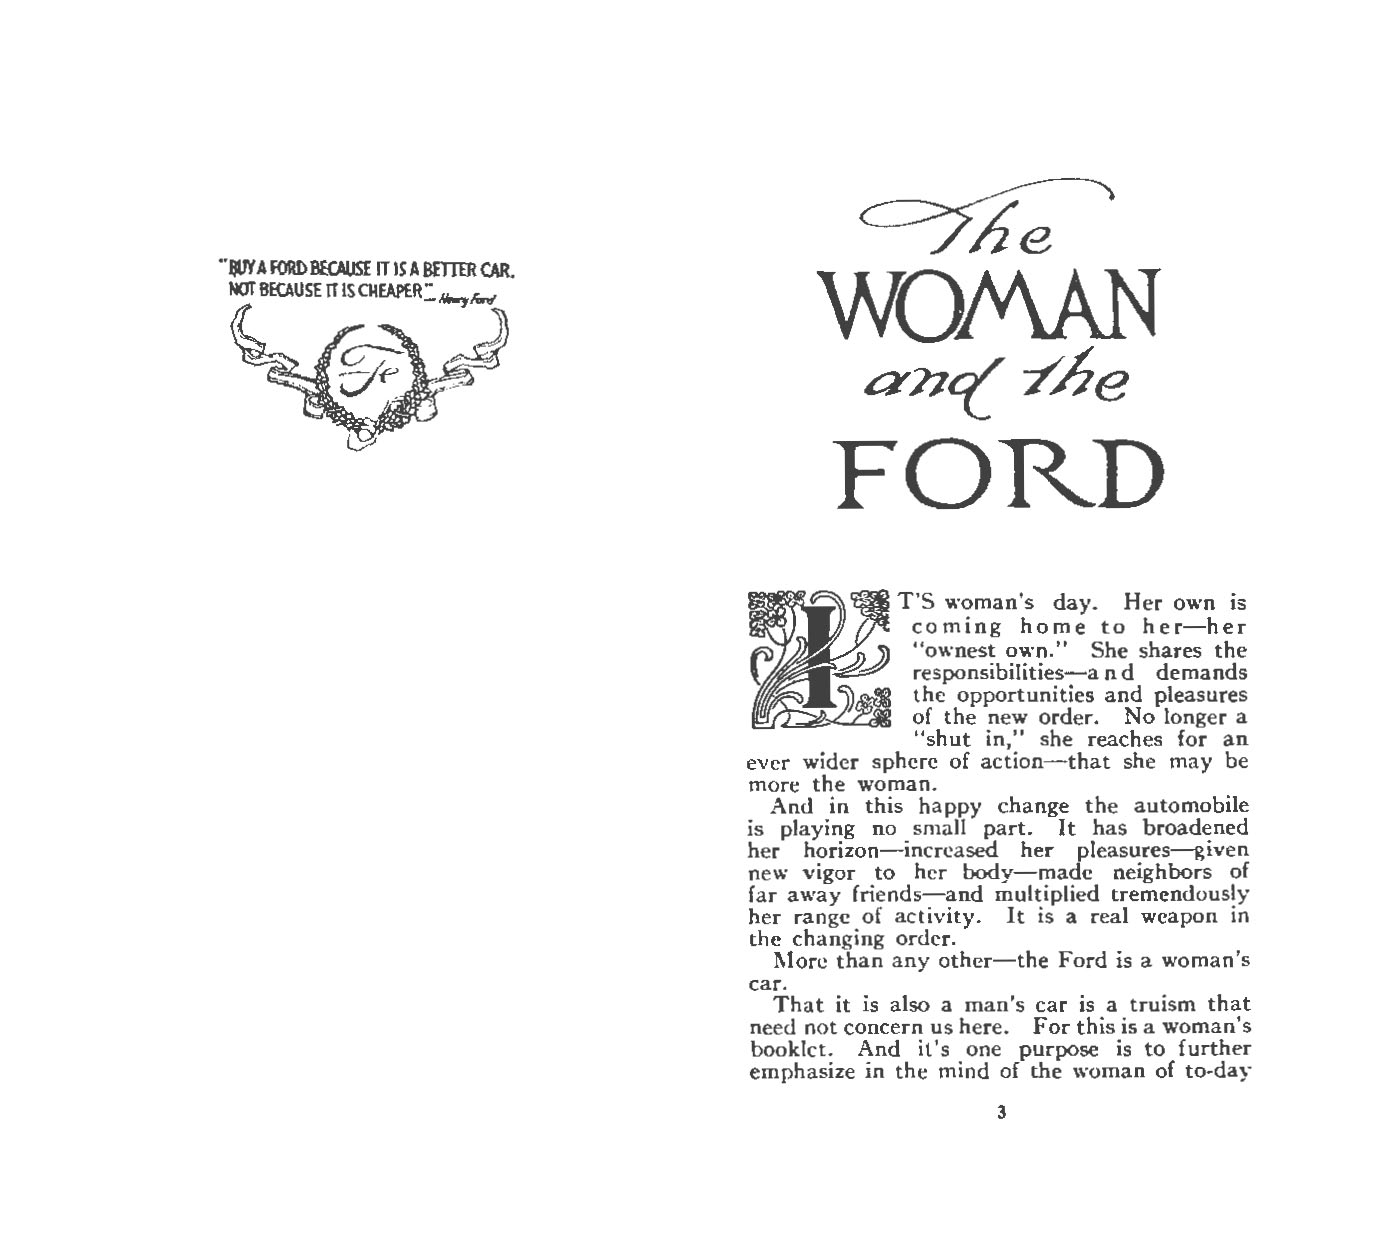 1912_The_Woman__the_Ford-02-03